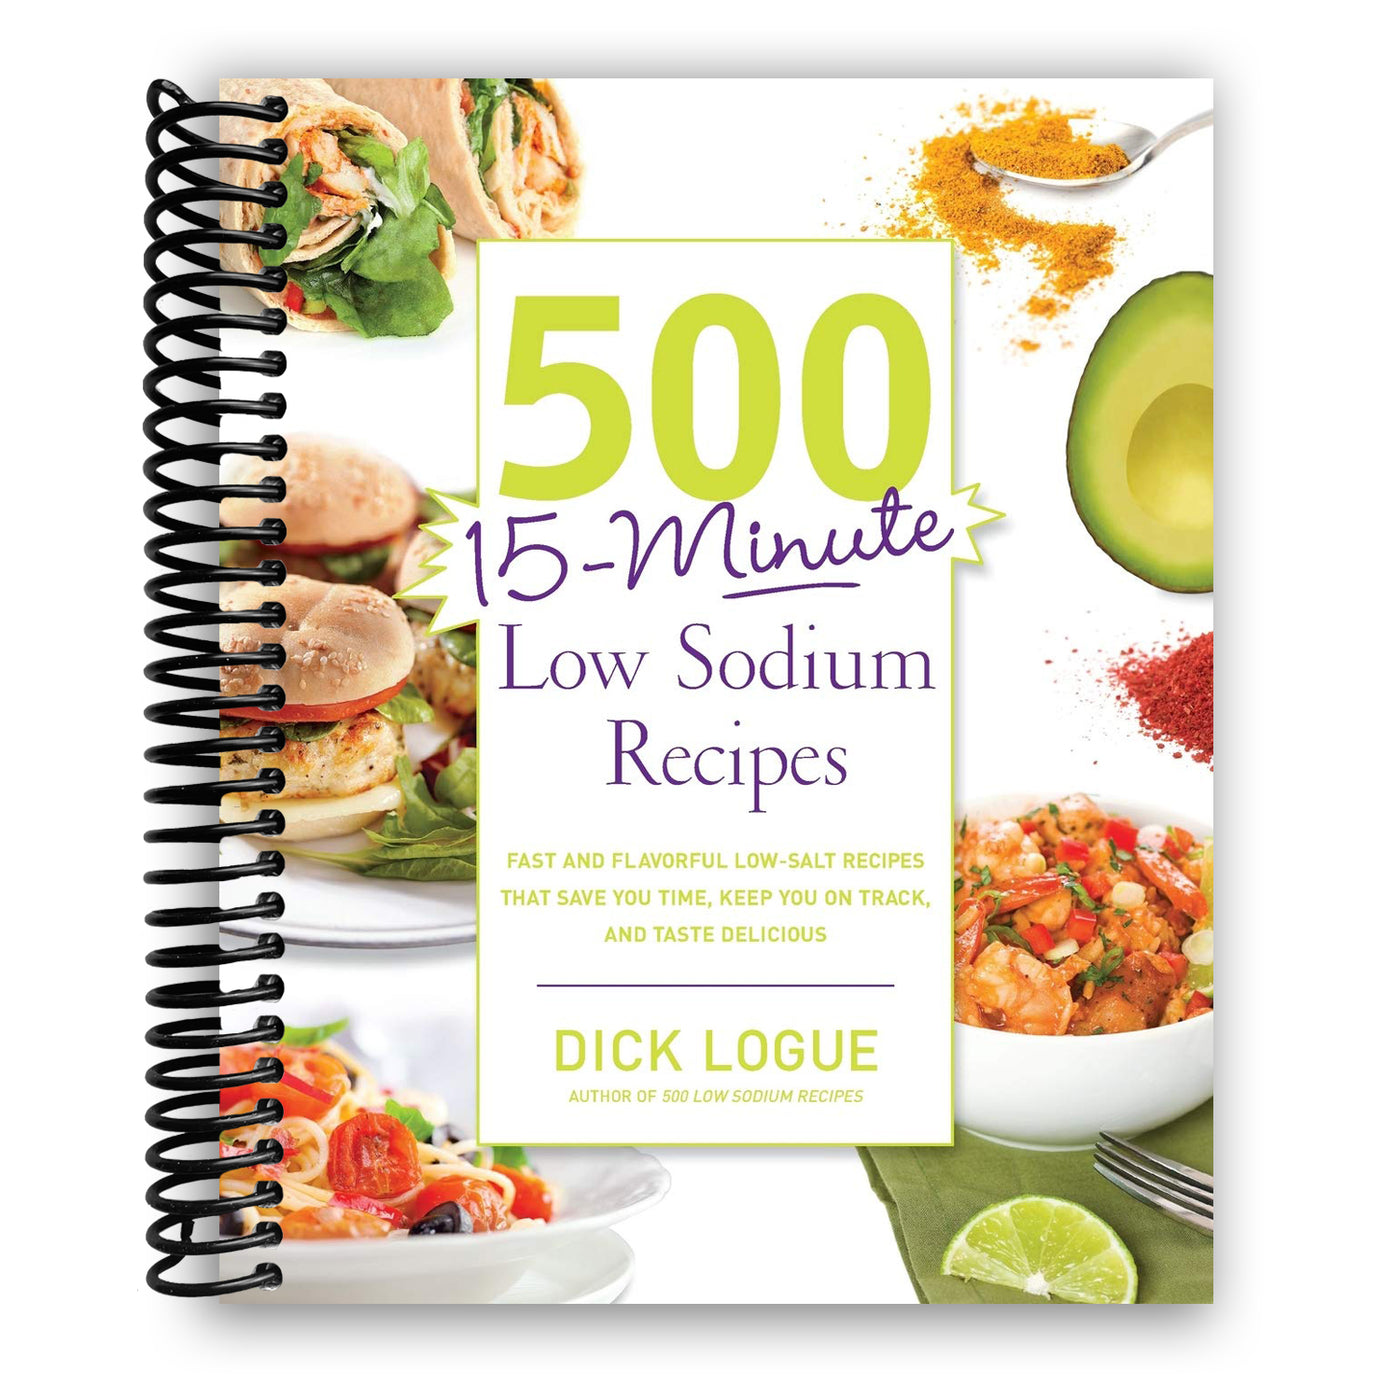 500 15-Minute Low Sodium Recipes: Fast and Flavorful Low-Salt Recipes that Save You Time, Keep You on Track, and Taste Delicious (Spiral Bound)